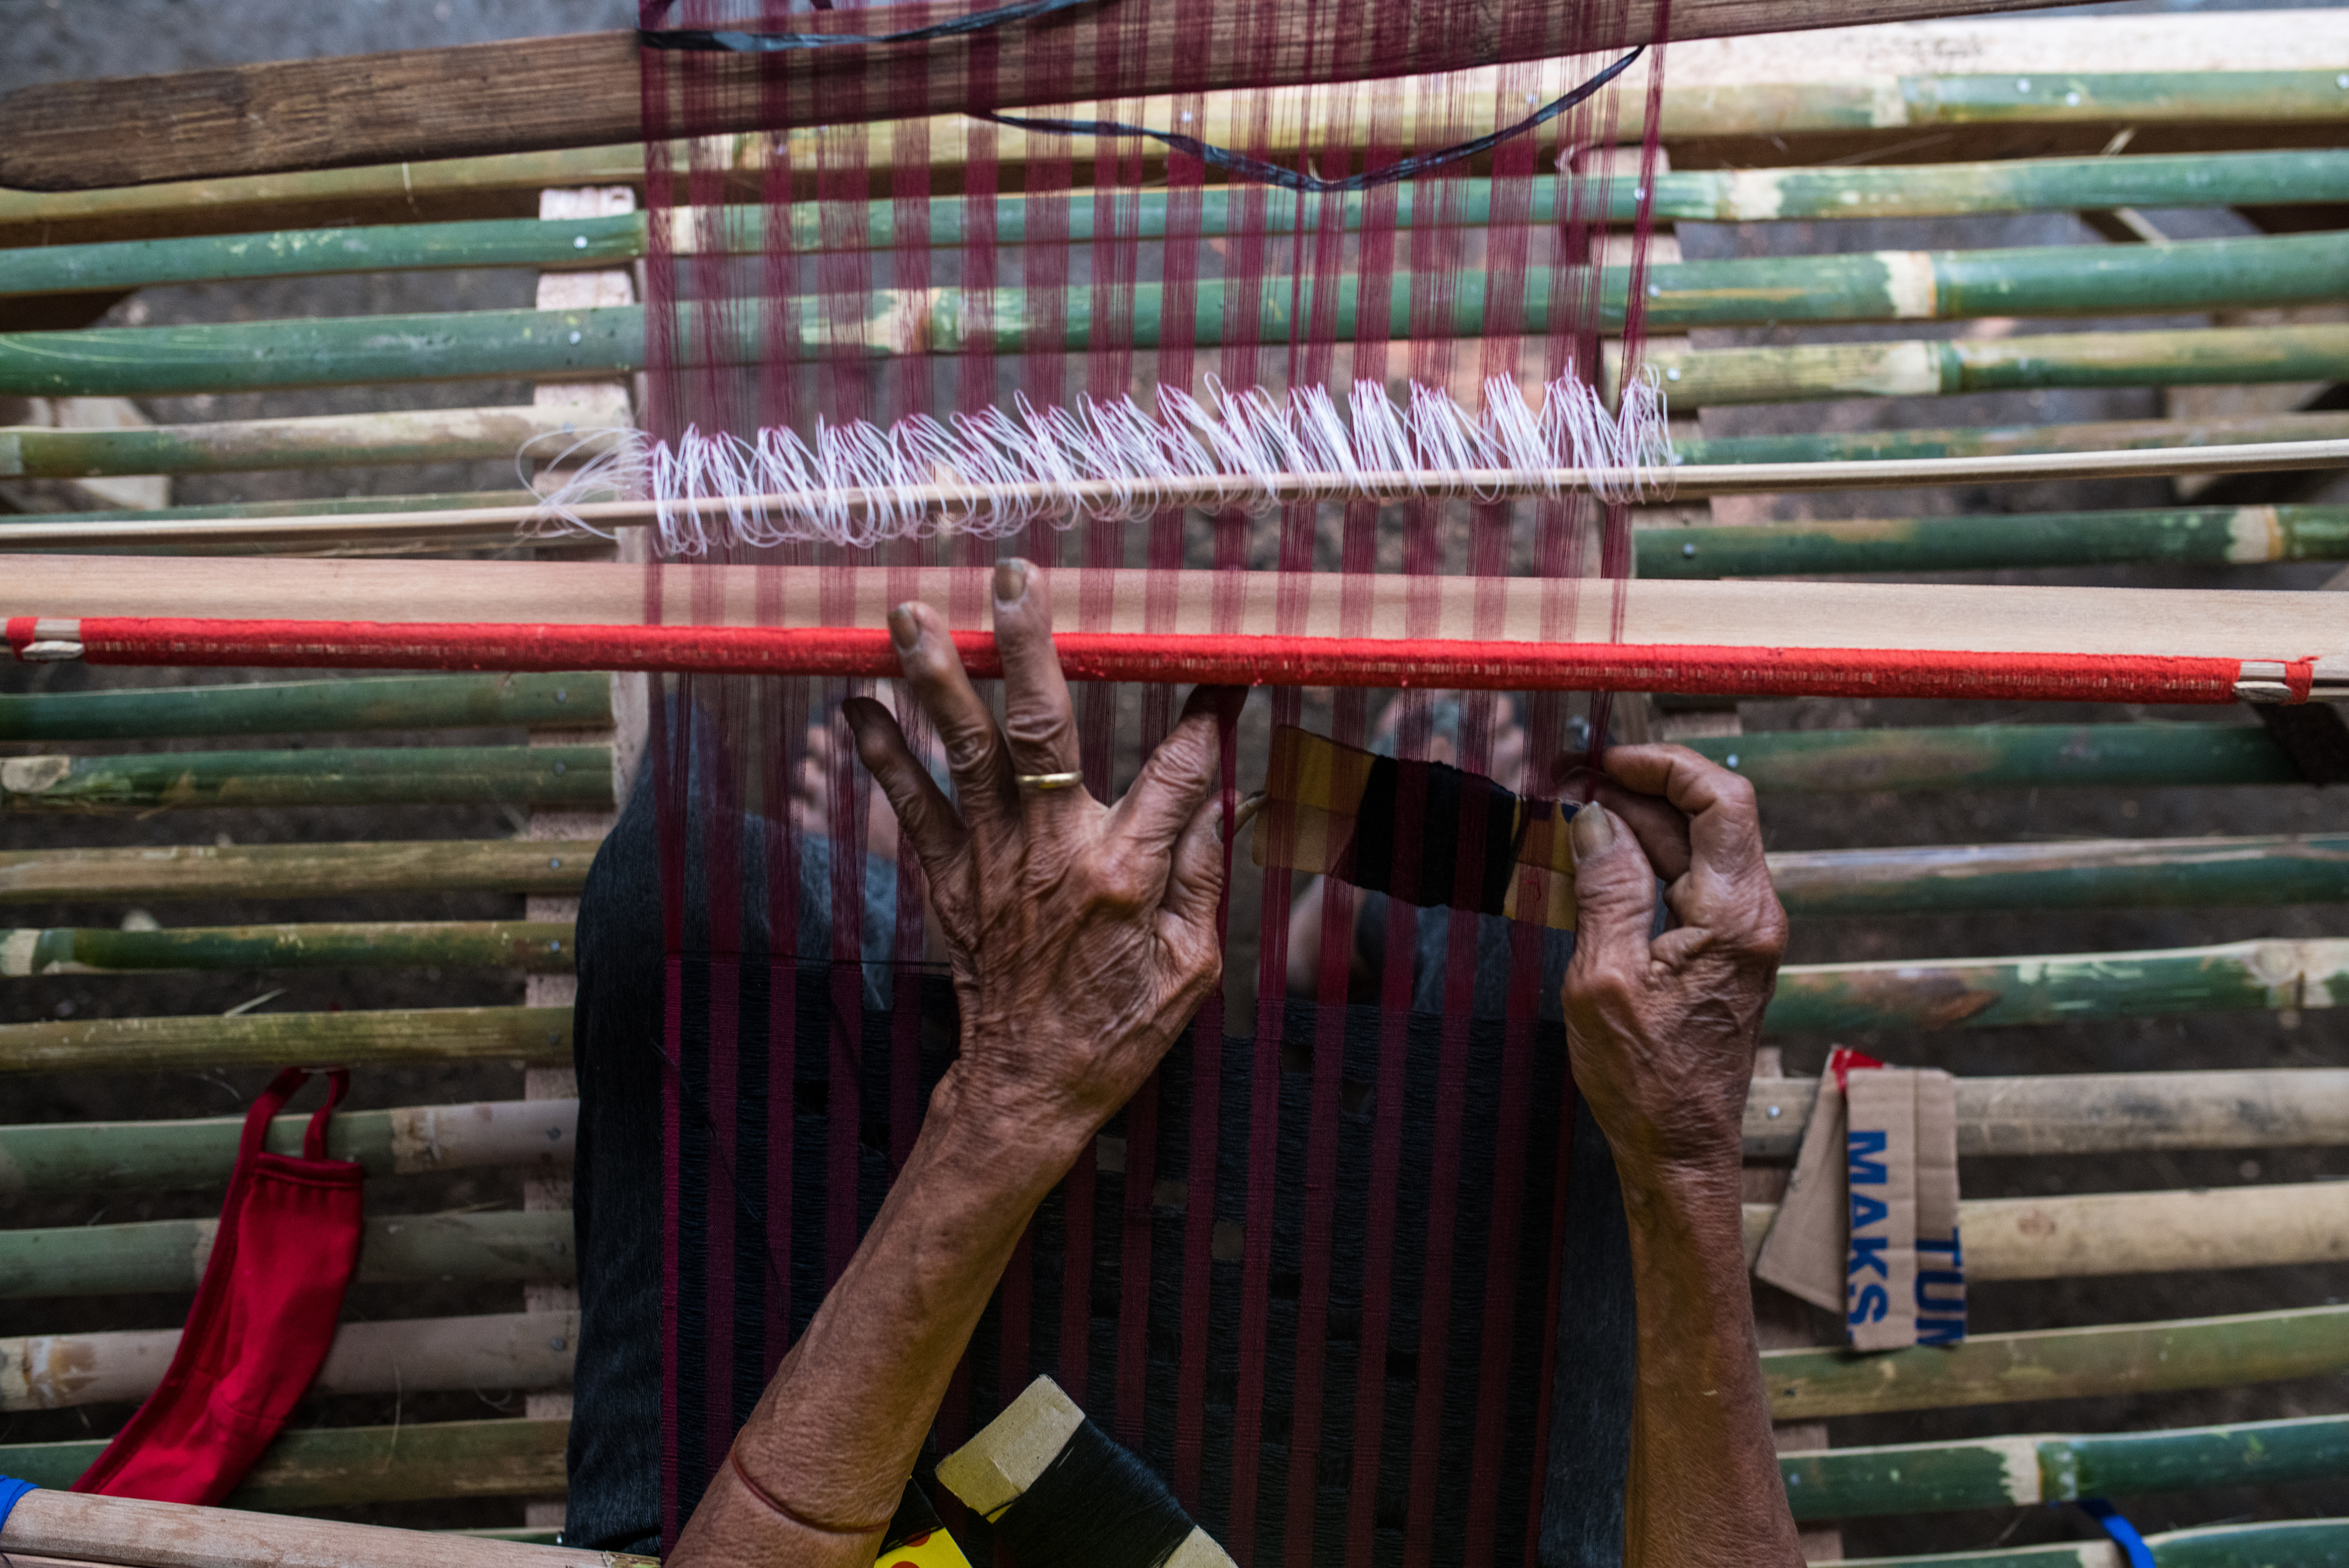 Person at Loom Weaving